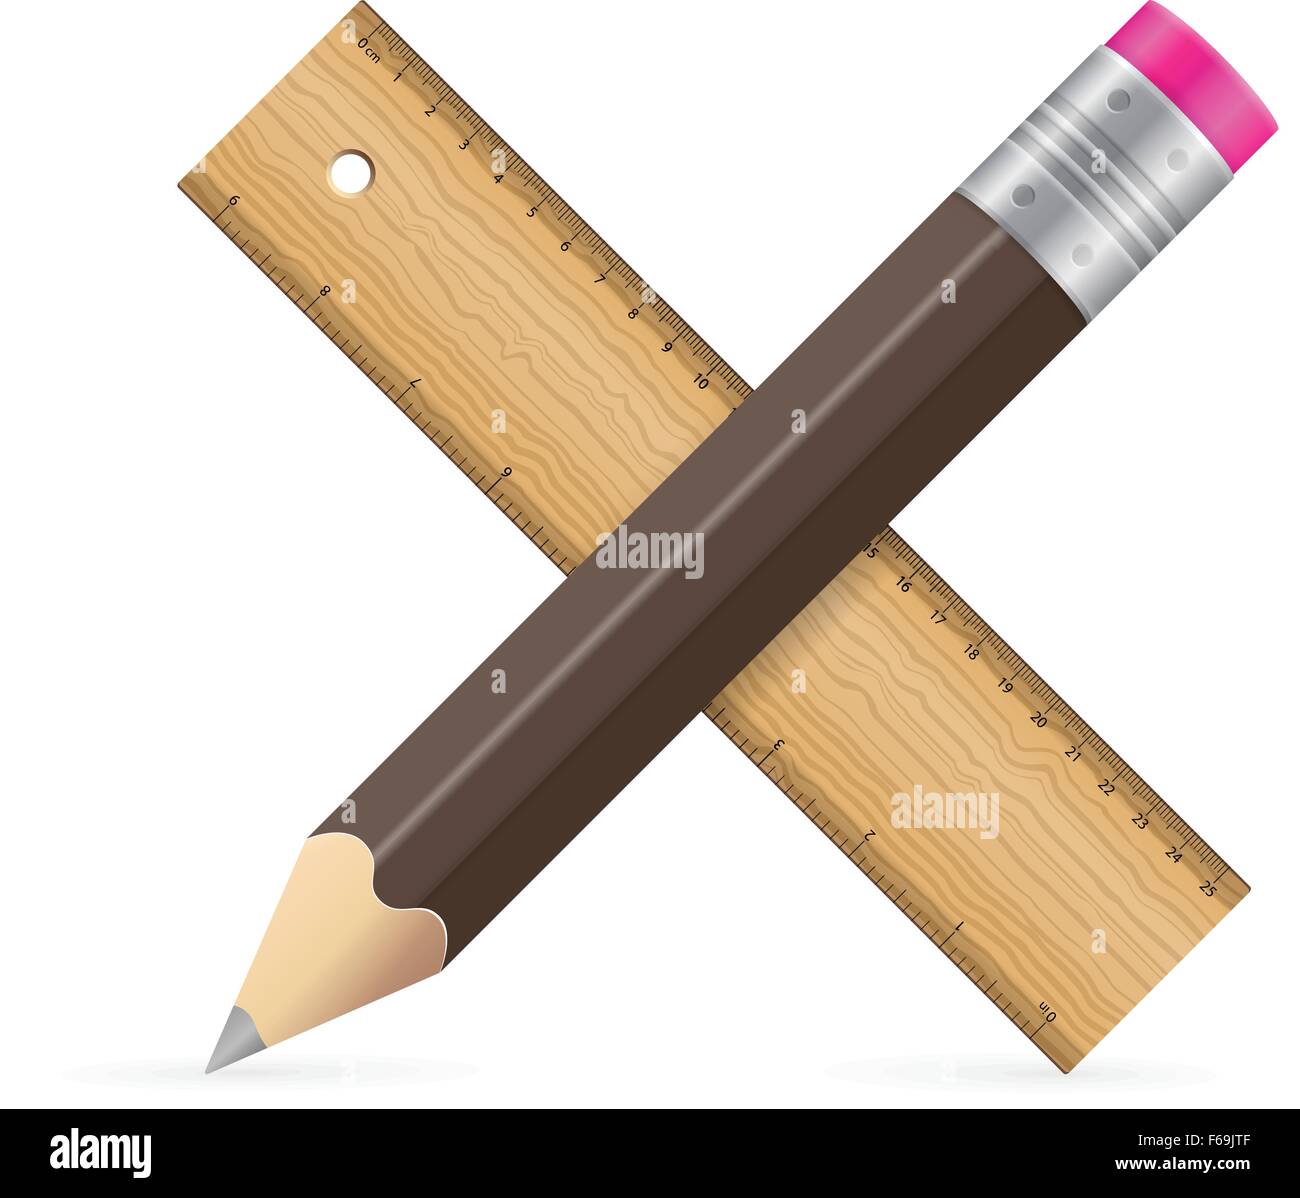 Pencil and ruler icon on a white background. Stock Vector